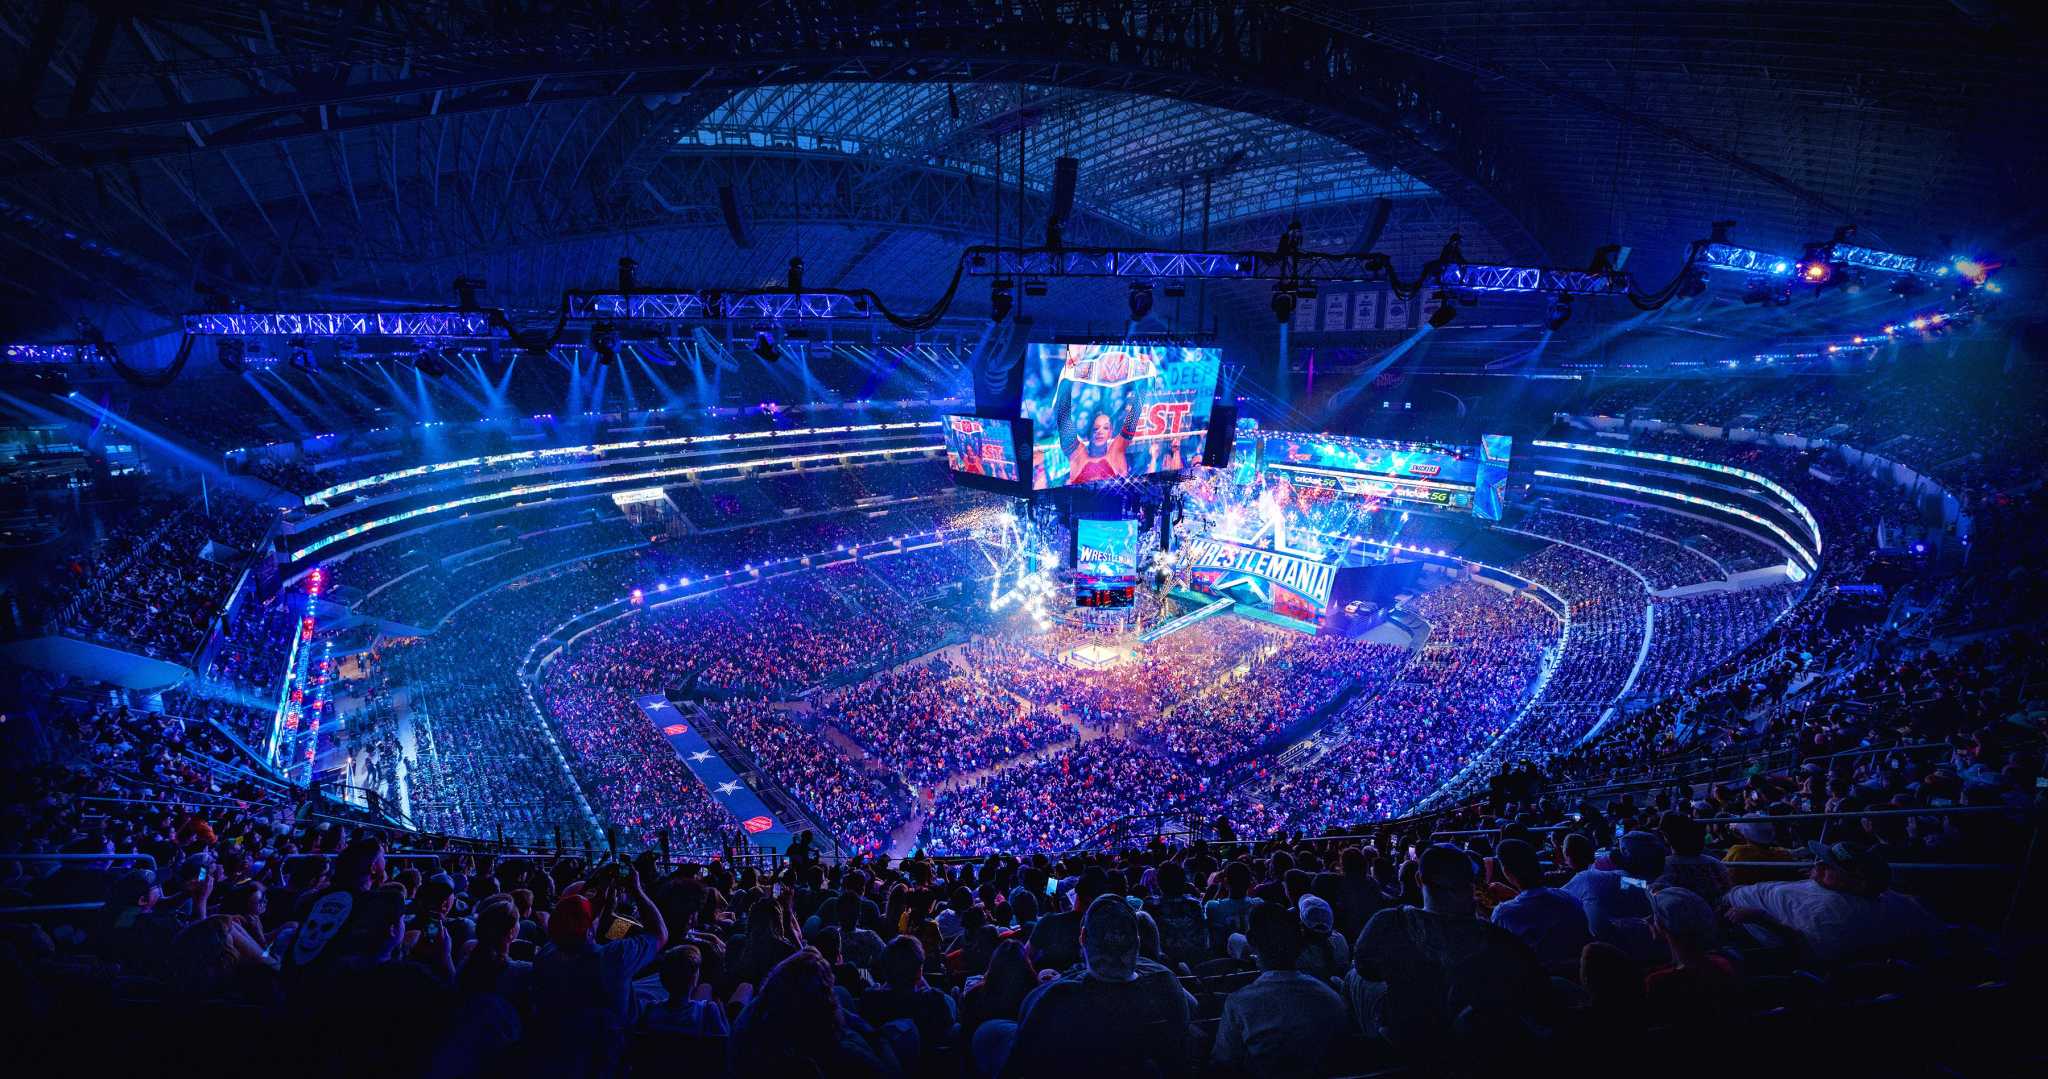 WWE Reports Record Revenue on WrestleMania, Ratings, Tickets